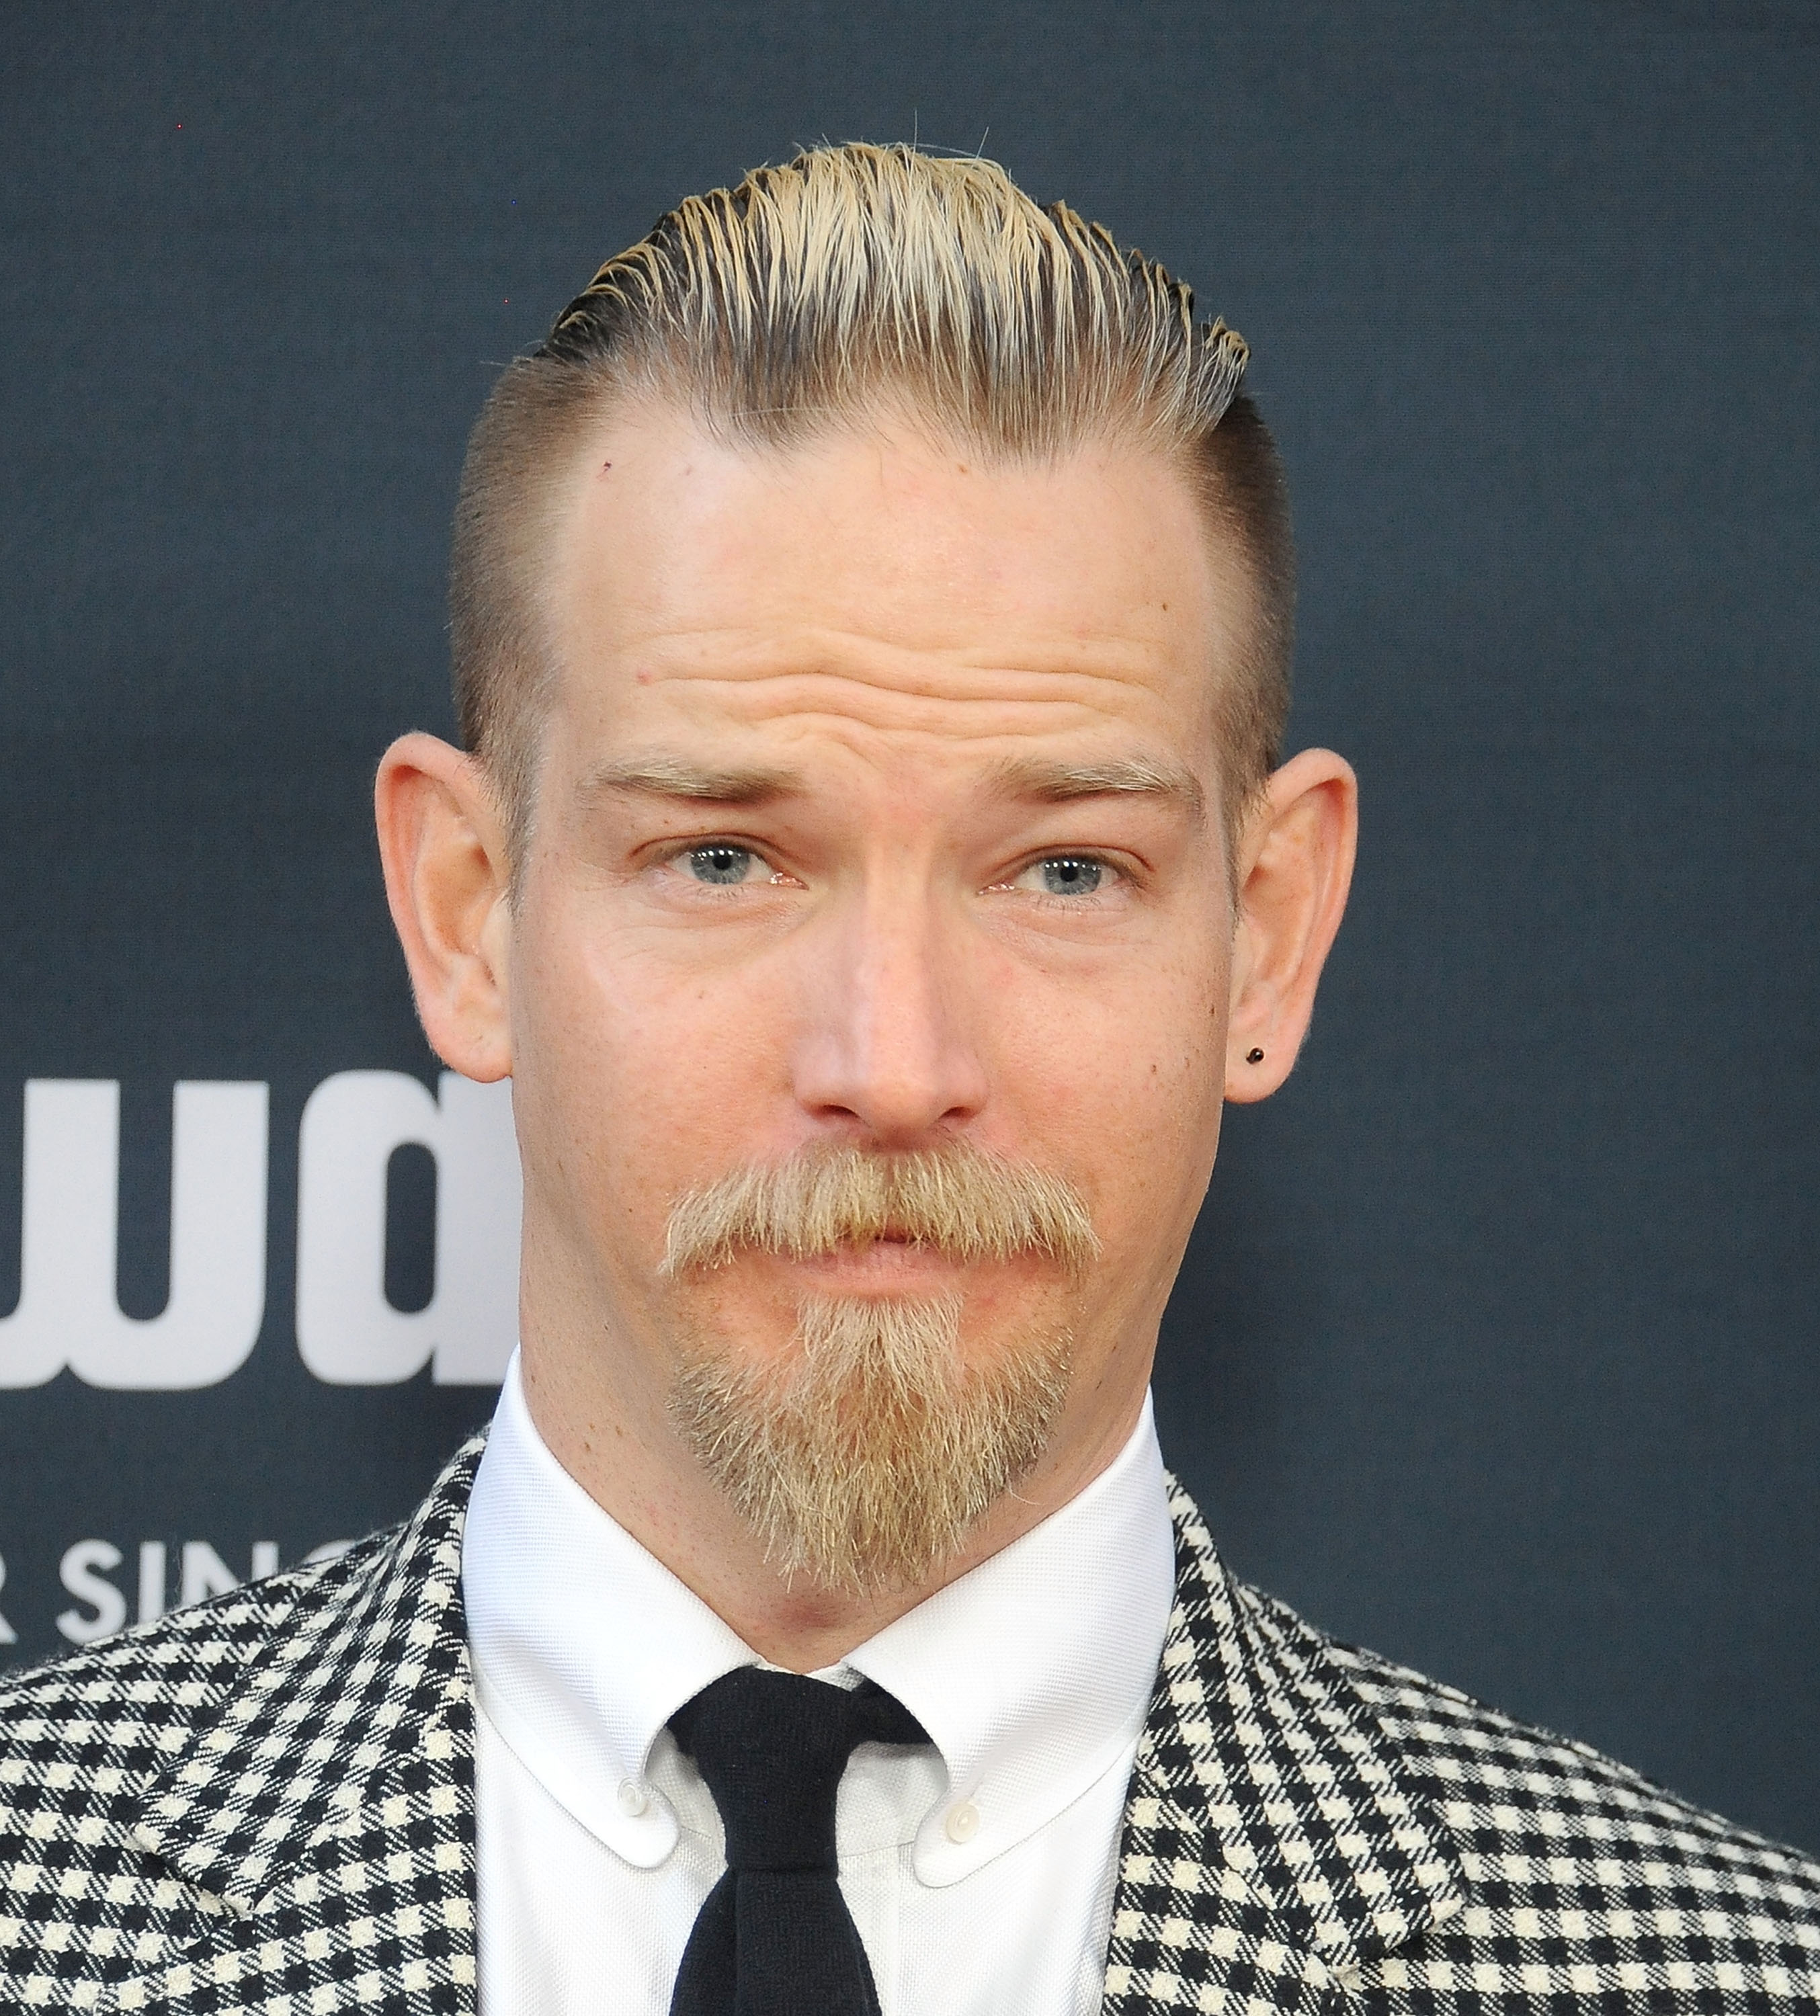 Sean Brosnan at the premiere of "No Escape" on August 17, 2015 in Los Angeles, California | Source: Getty Images